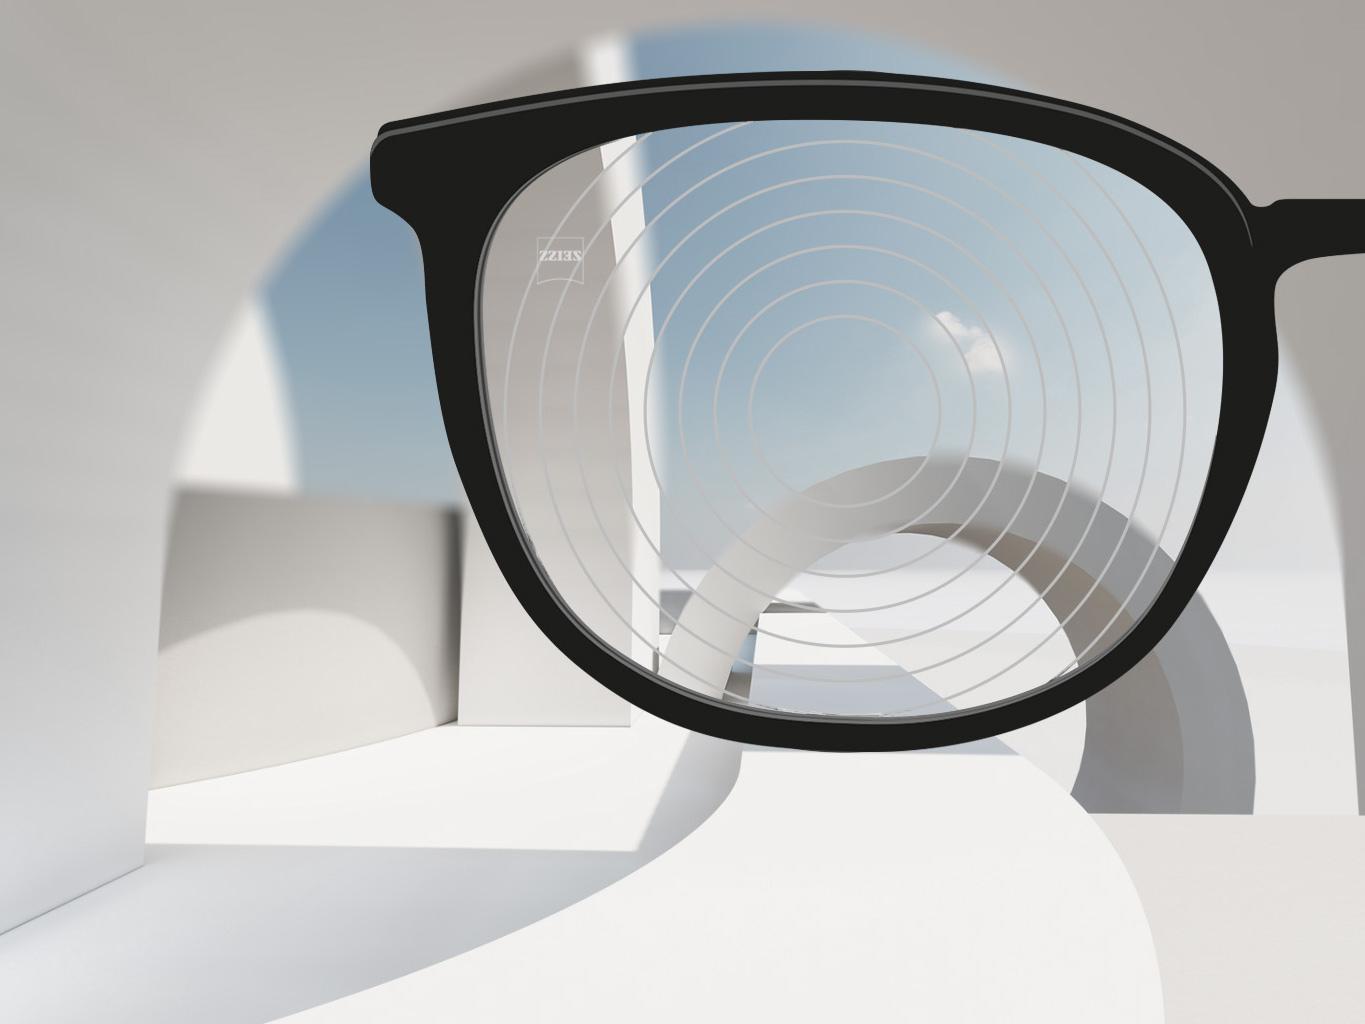 A close-up image of myopia management lenses by ZEISS, with black spectacle frames and concentric circles on the lens surface. 